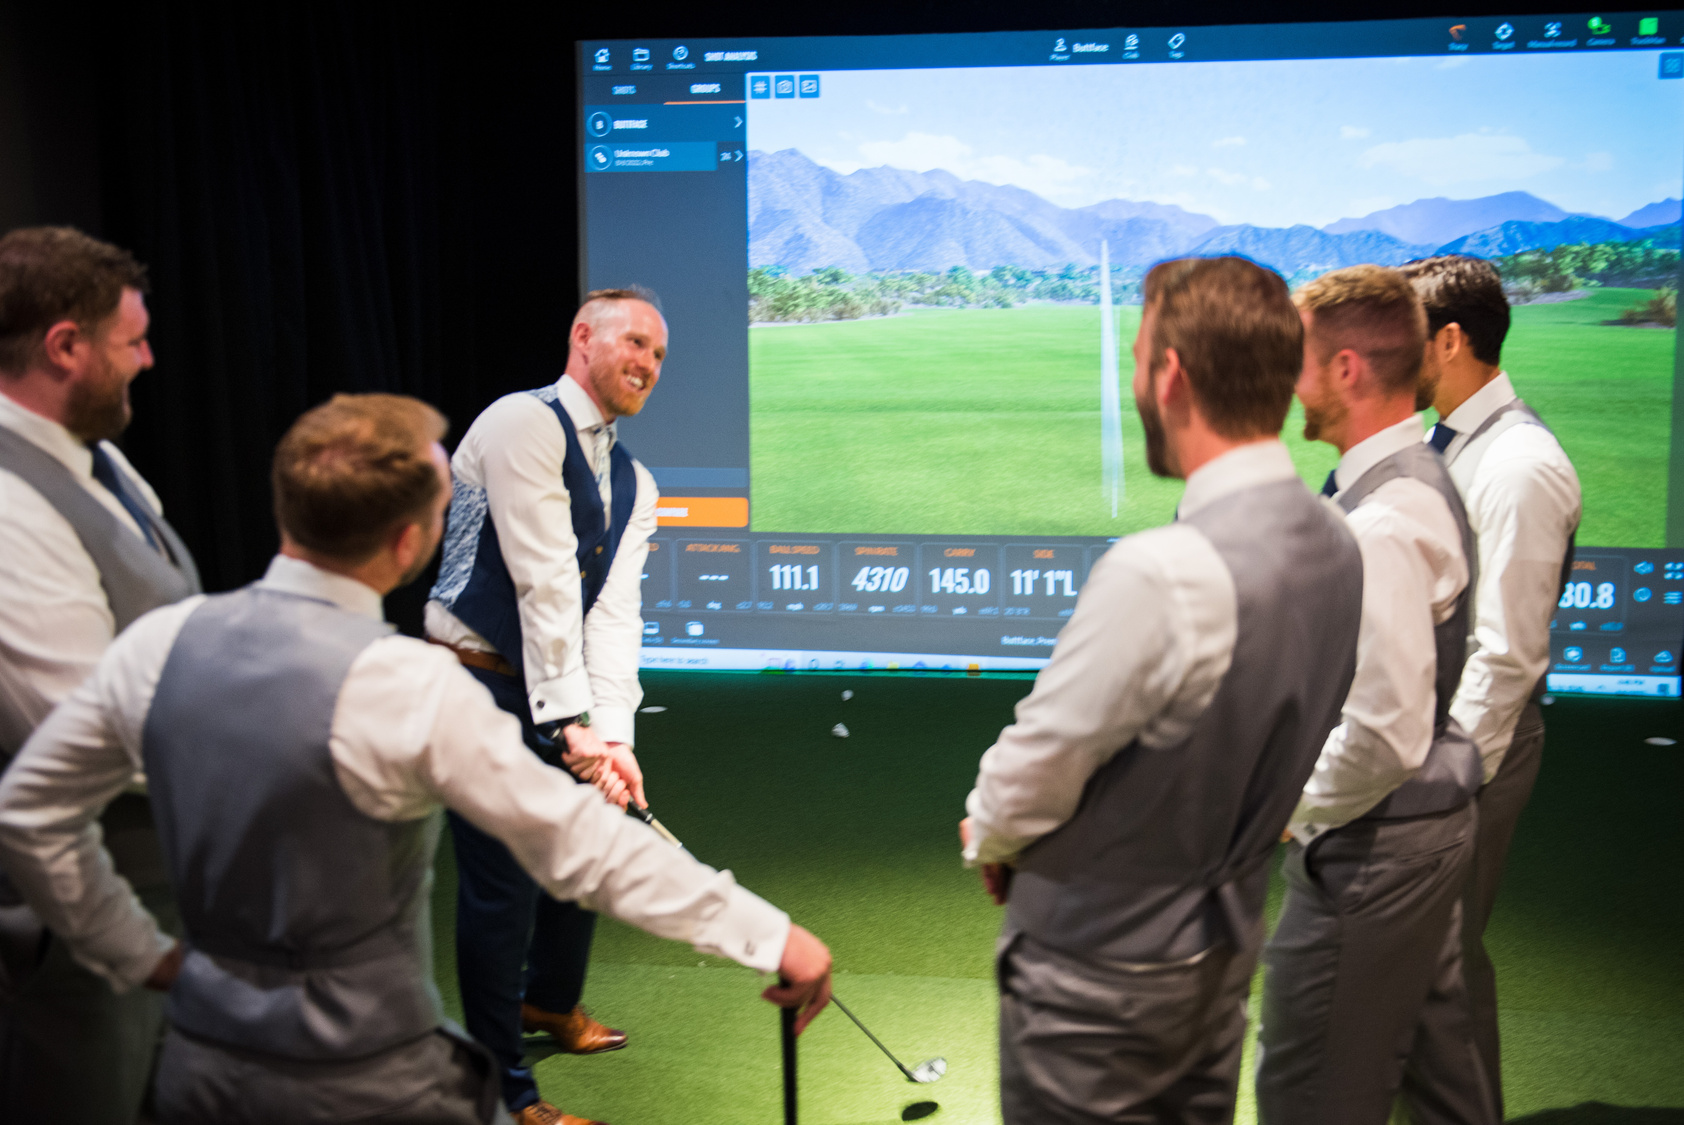 A group of groomsmen playing virtual golf on a large screen.